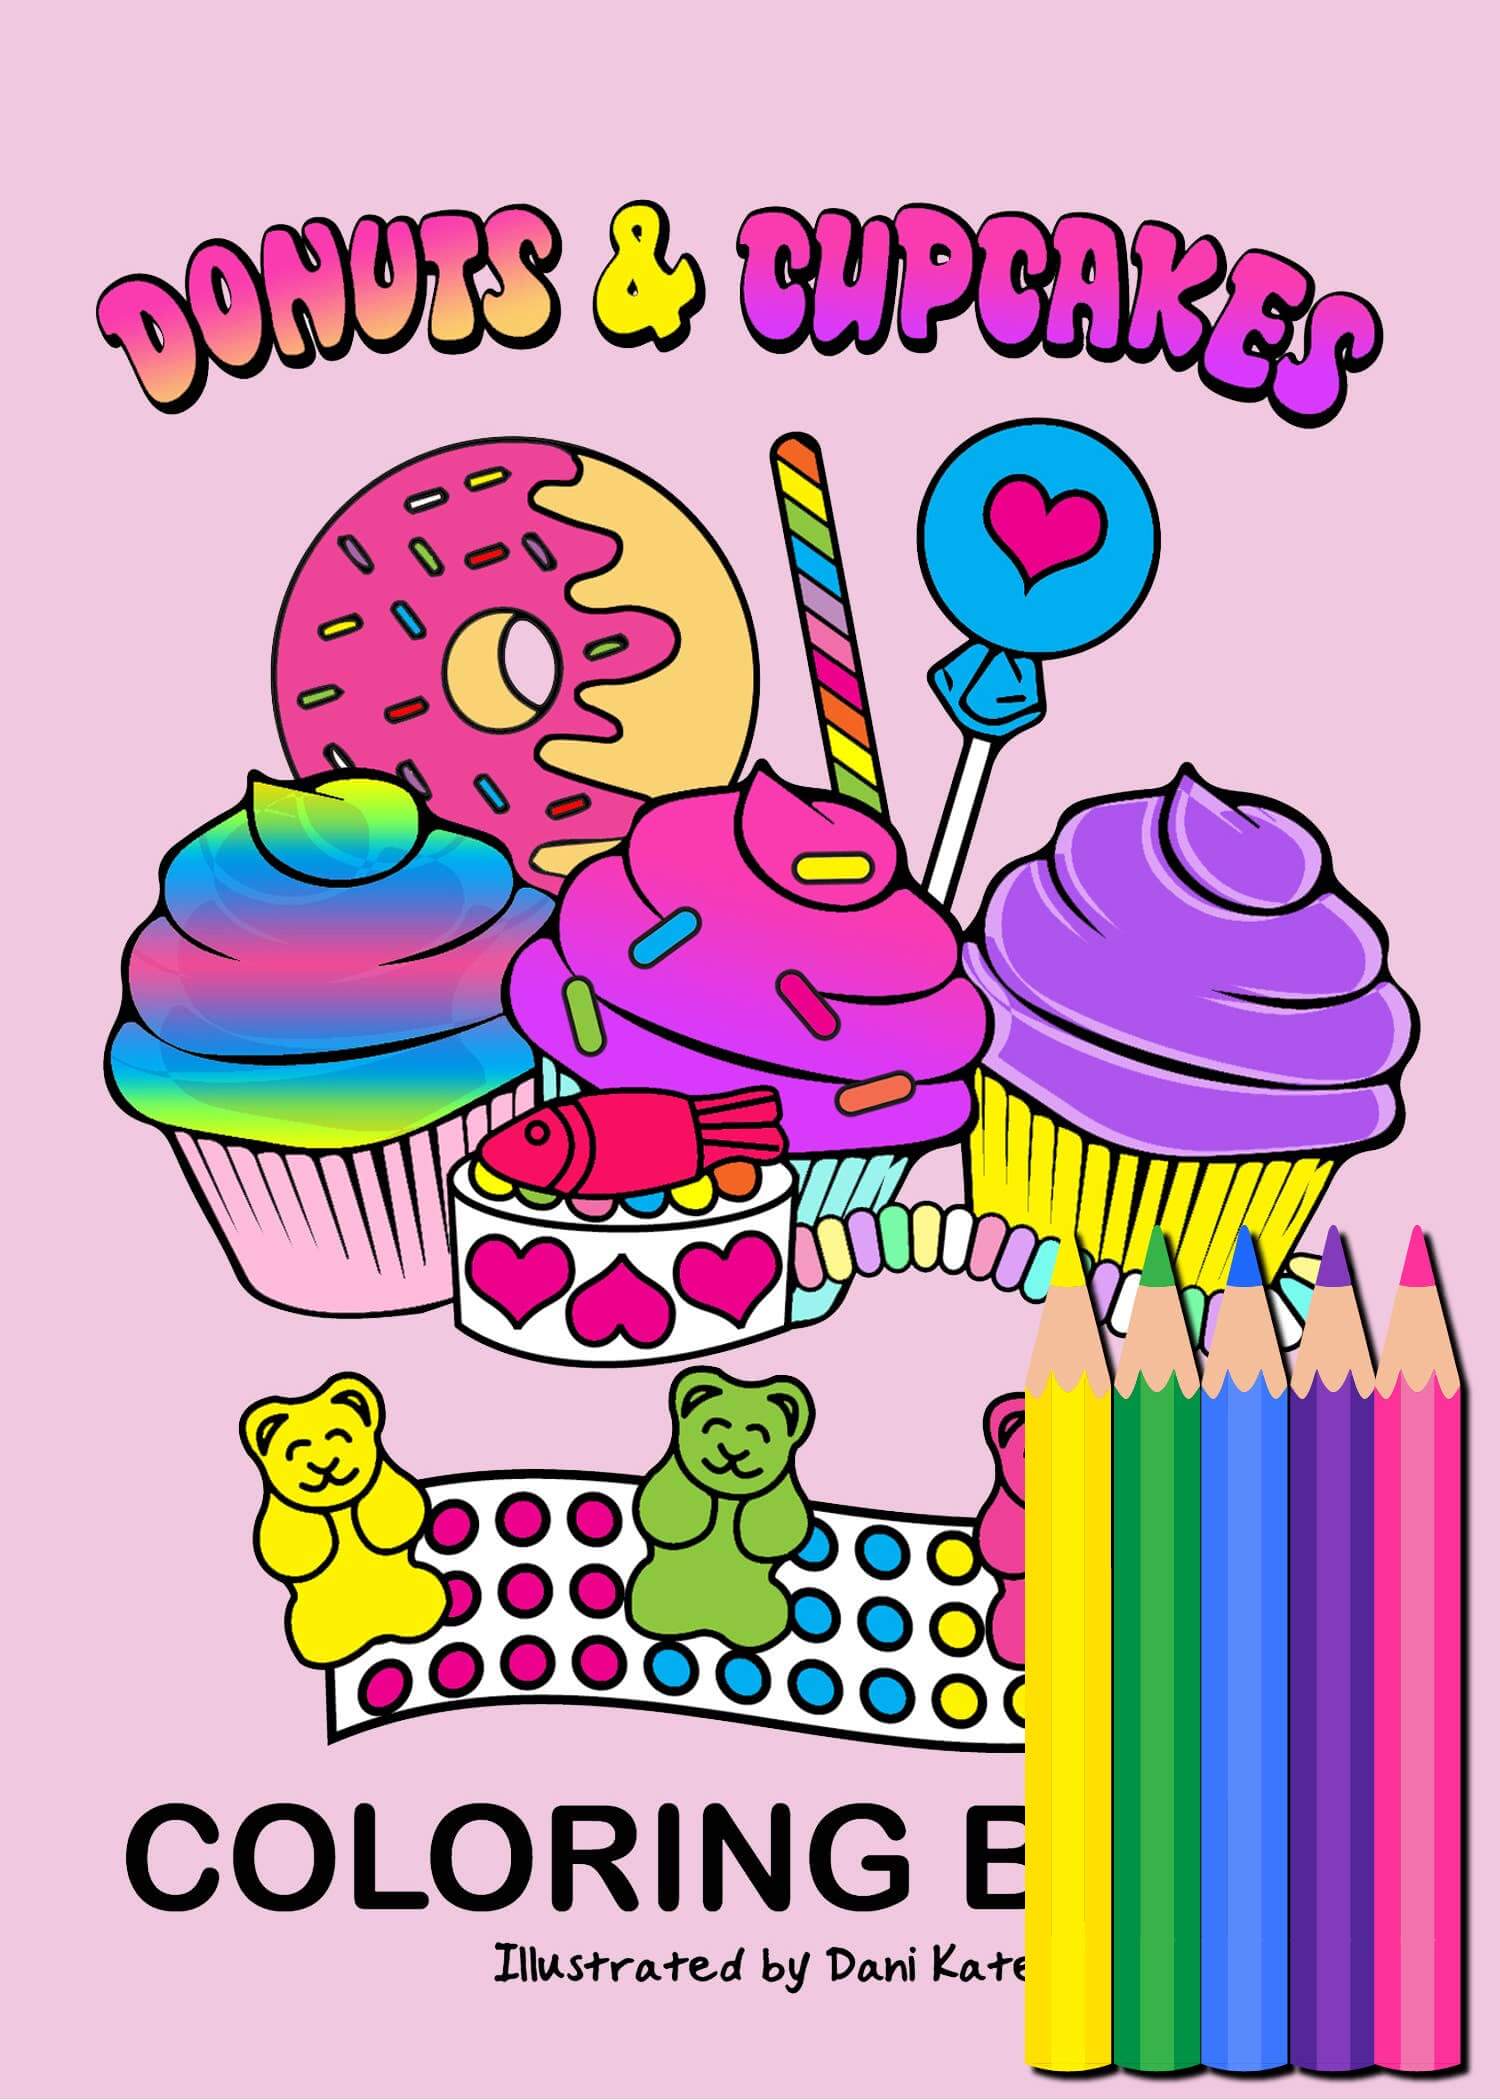 Mini Coloring Books w/ colored pencils Donuts and Cupcakes